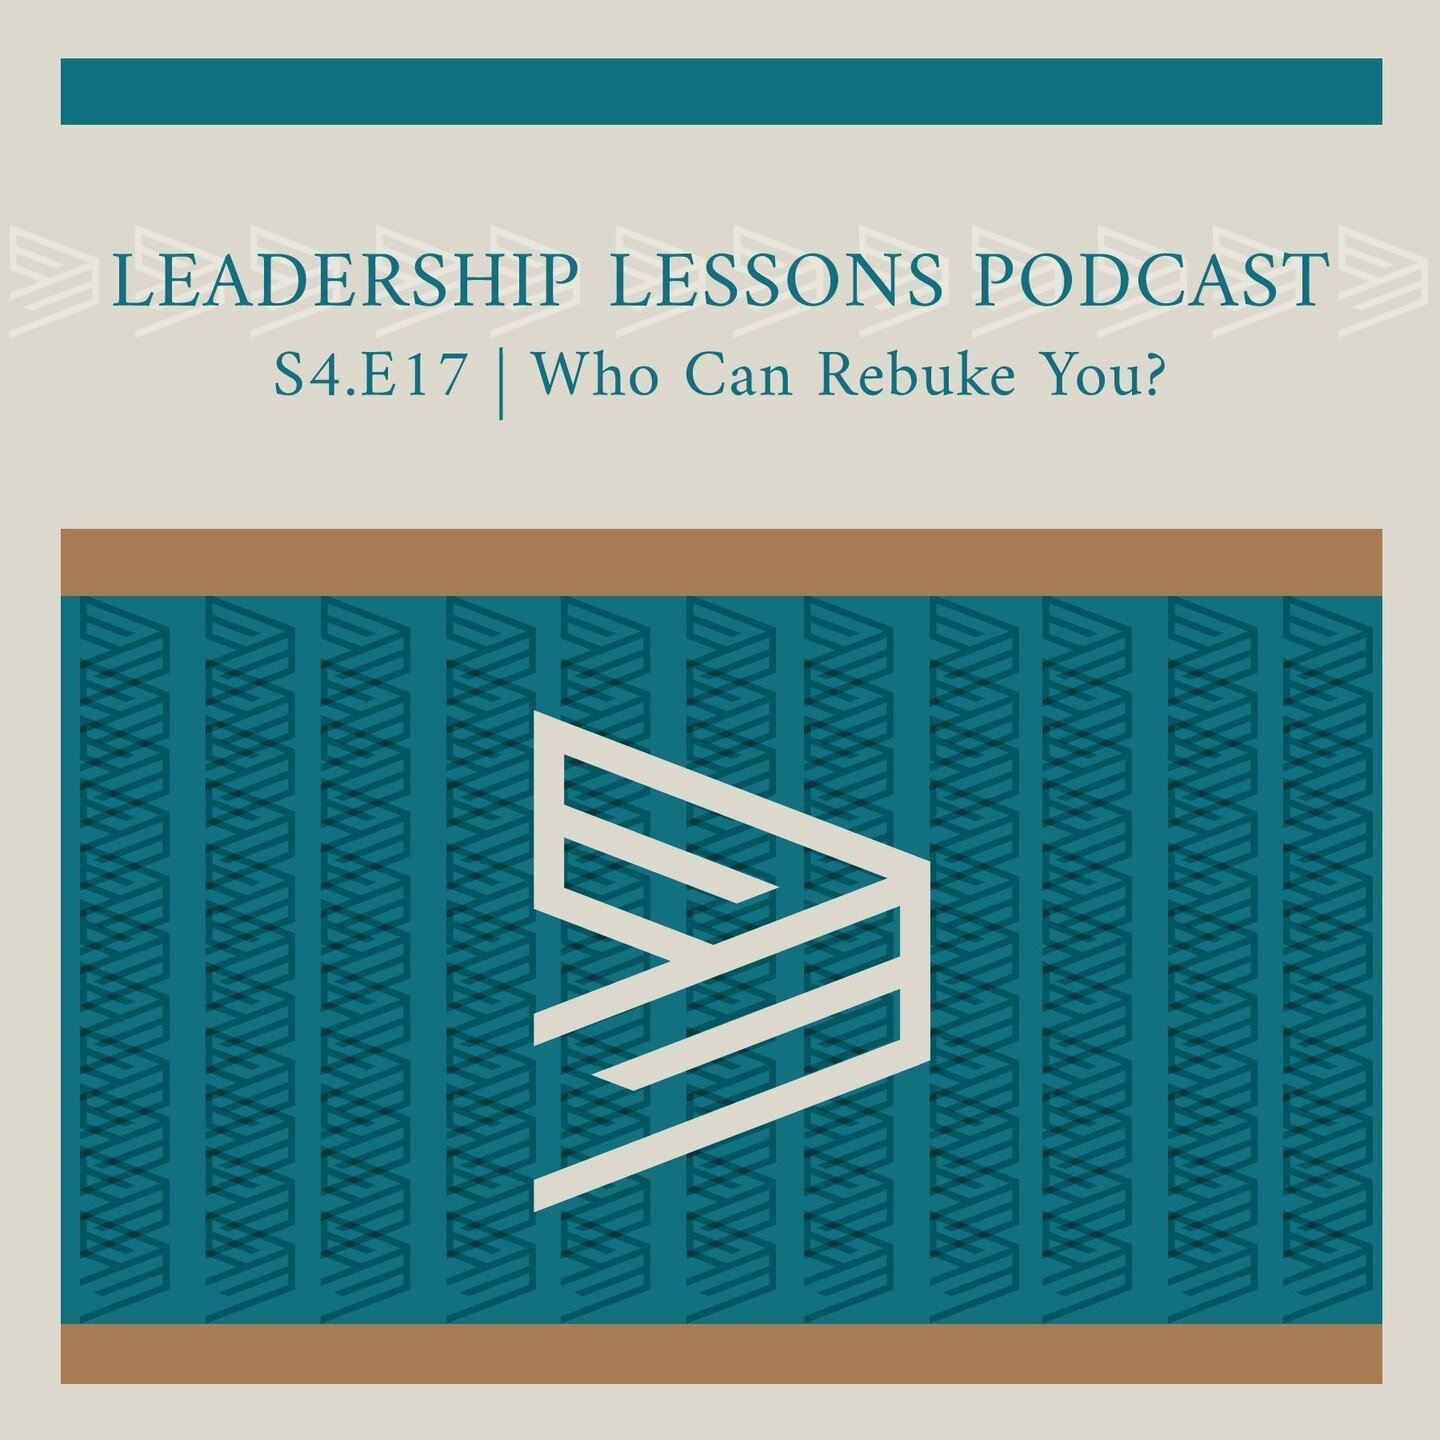 EE Leaders | Leadership Lessons Podcasts  Season 4 Episode 17 - Who Can Rebuke You

In this week&rsquo;s episode from Nehemiah 5, Pastor Daniel talks about how Nehemiah responded when the people&rsquo;s behavior toward each other became sinful. He re